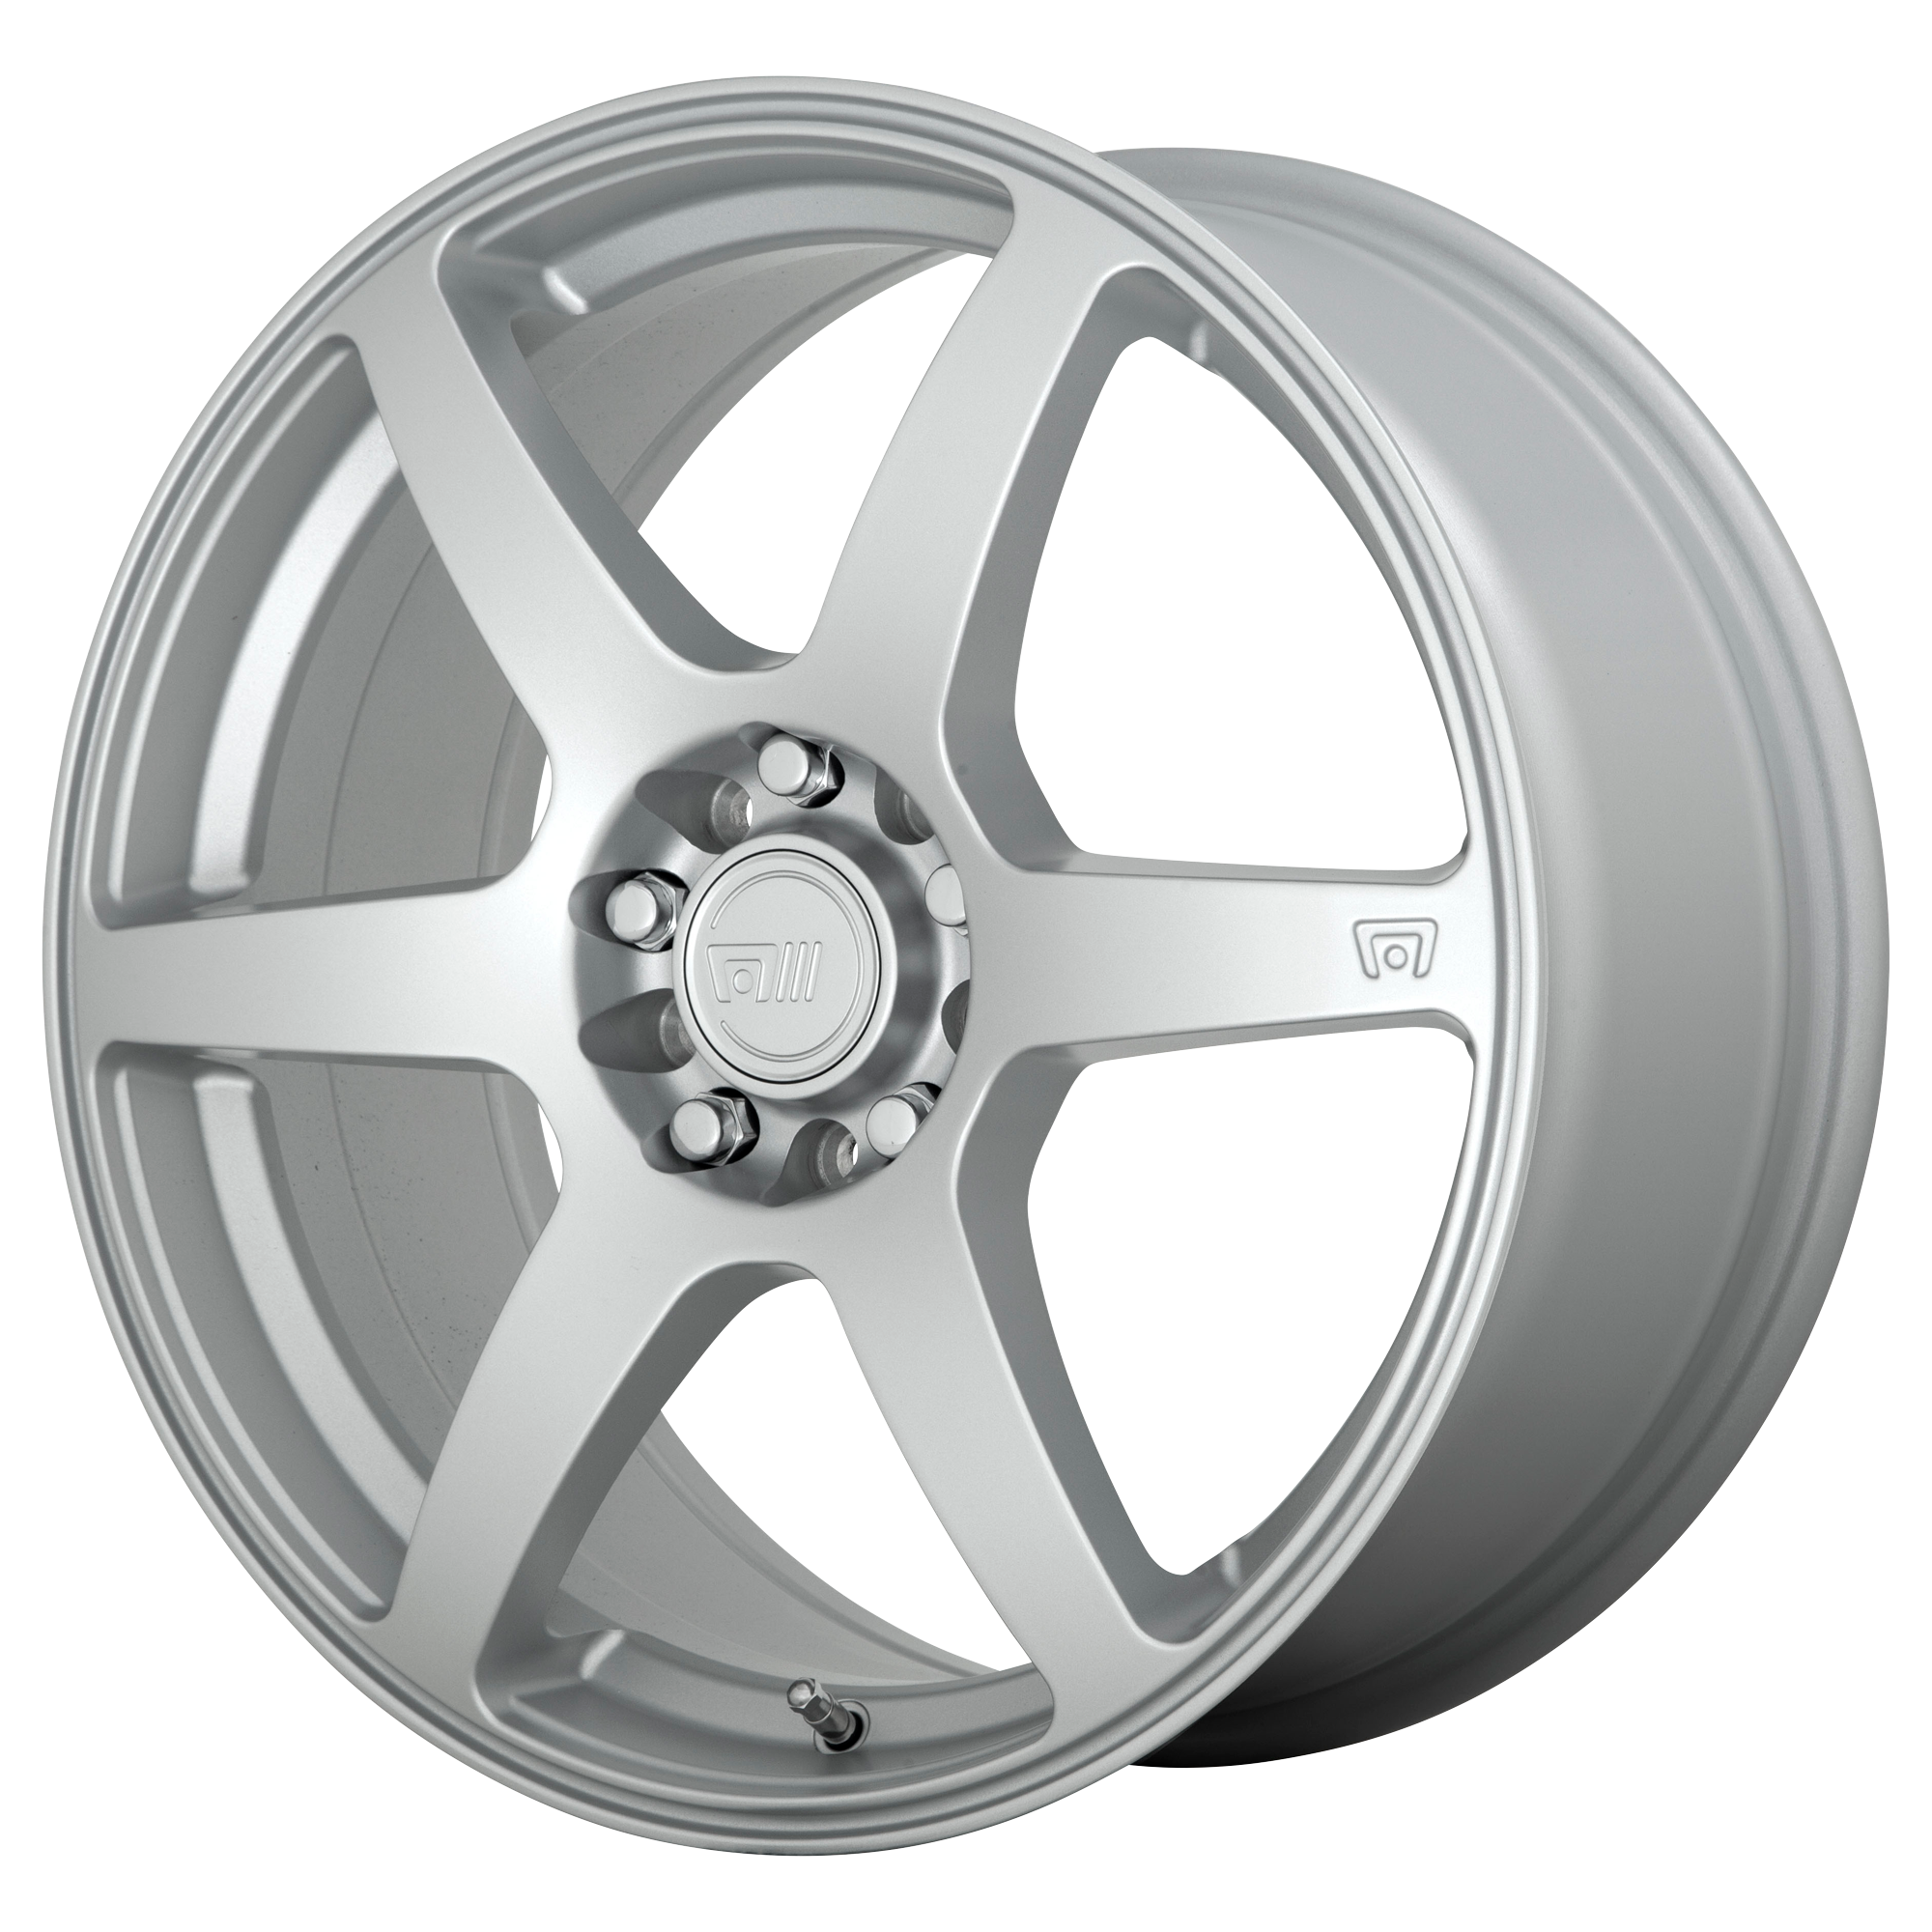 CS6 15x6.5 4x100.00/4x114.30 HYPER SILVER (40 mm) - Tires and Engine Performance